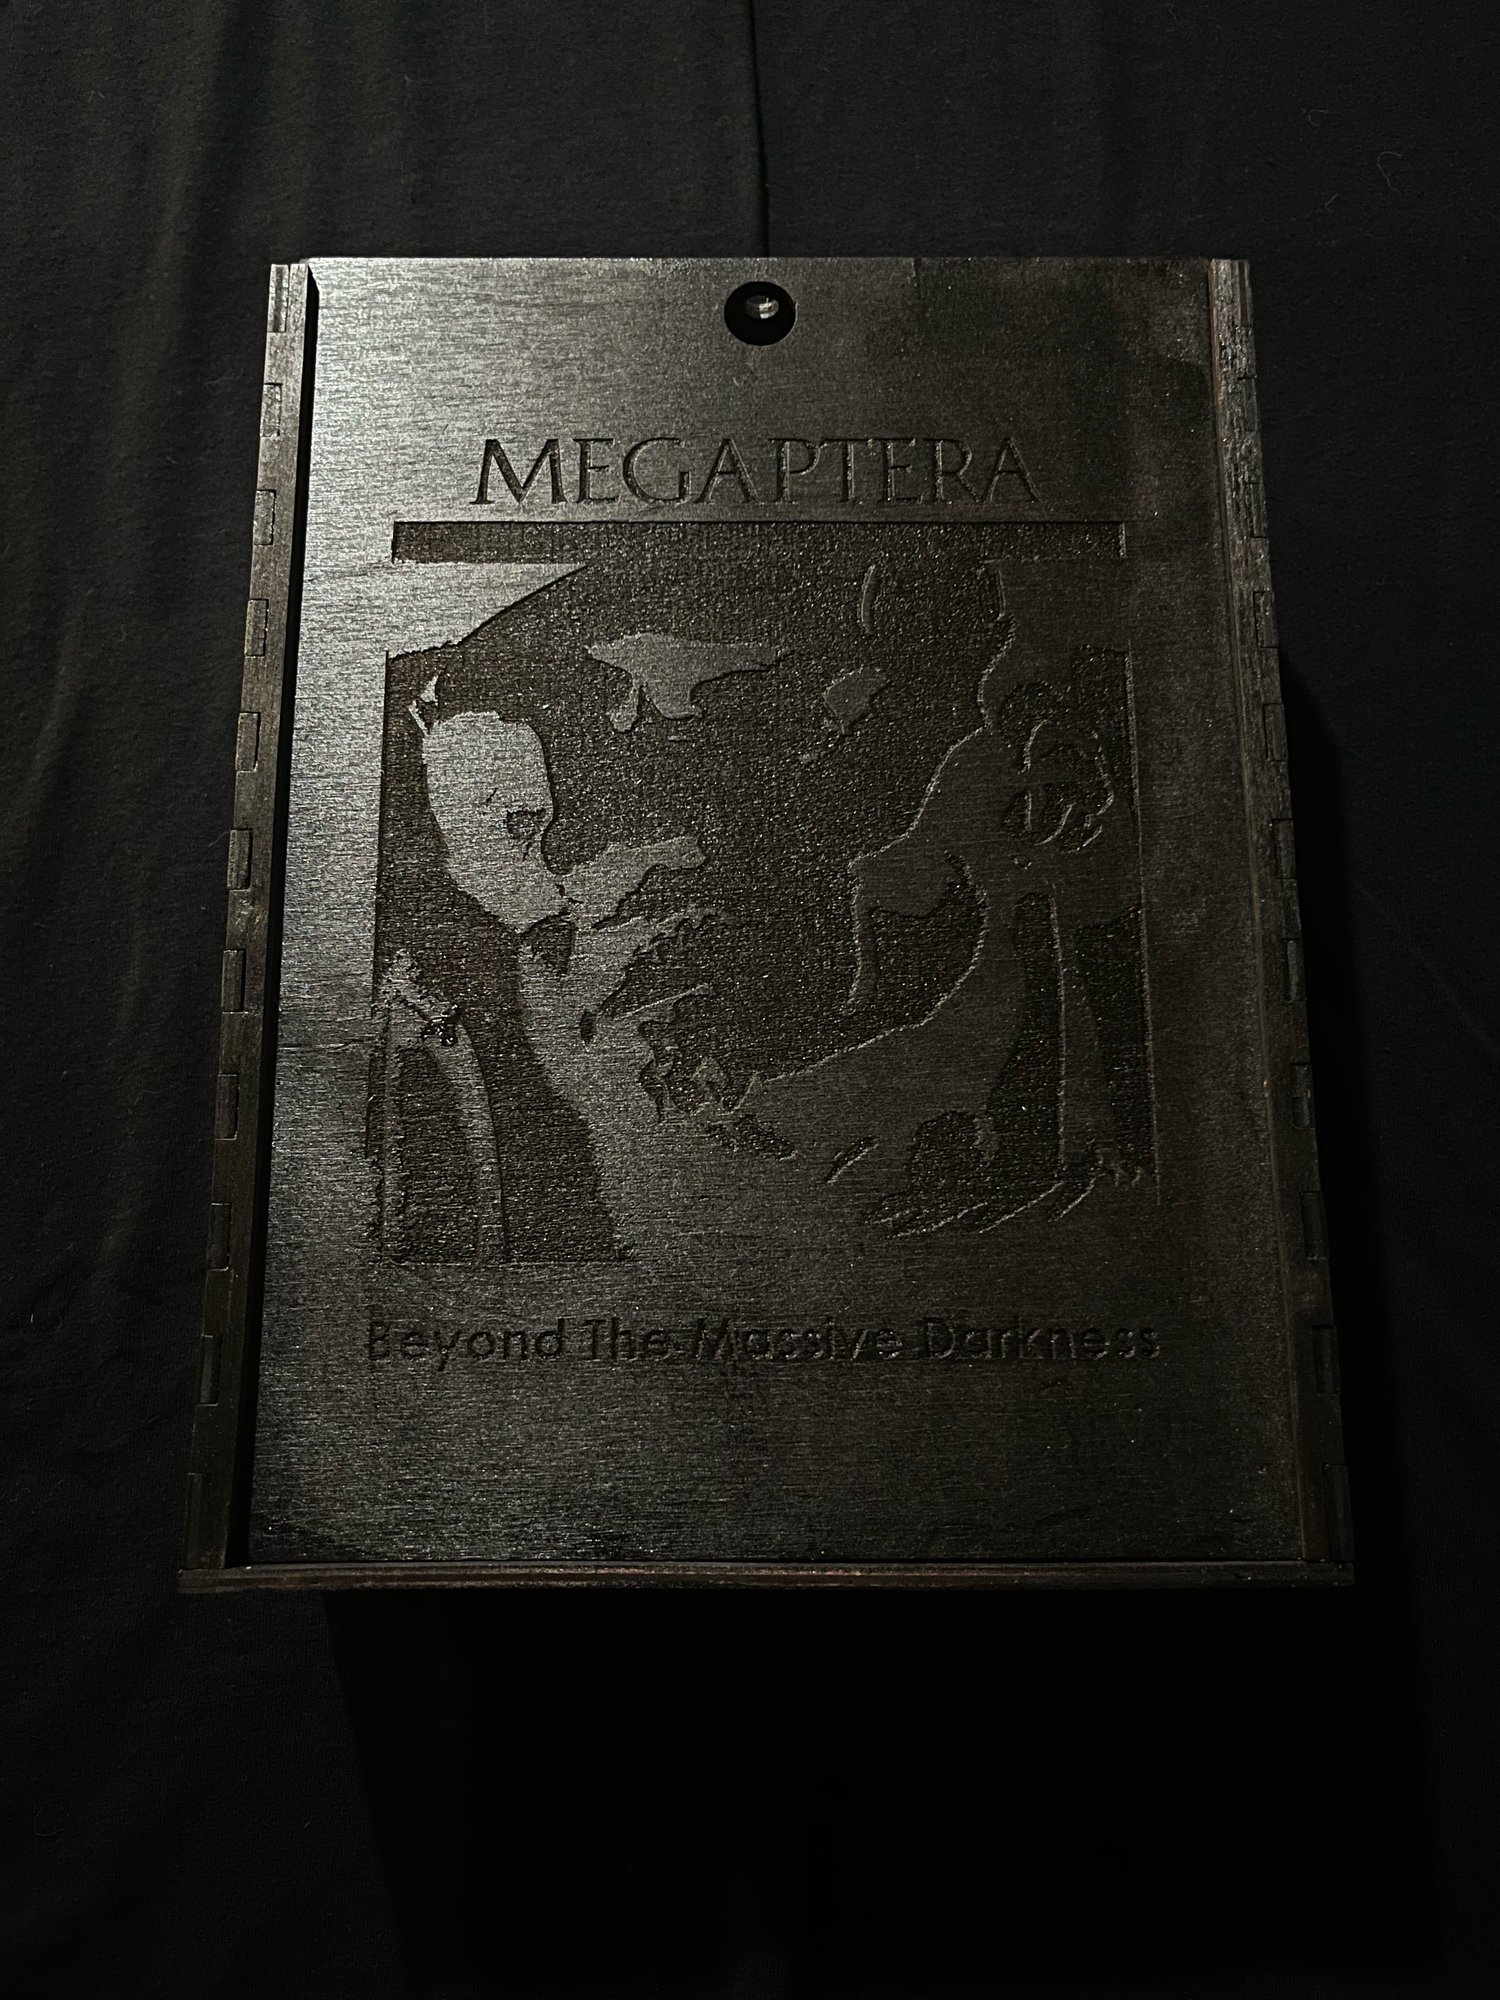 *USA ONLY* Megaptera - Beyond The Massive Darkness 2xCD WOODEN BOX SET (Old Captain)